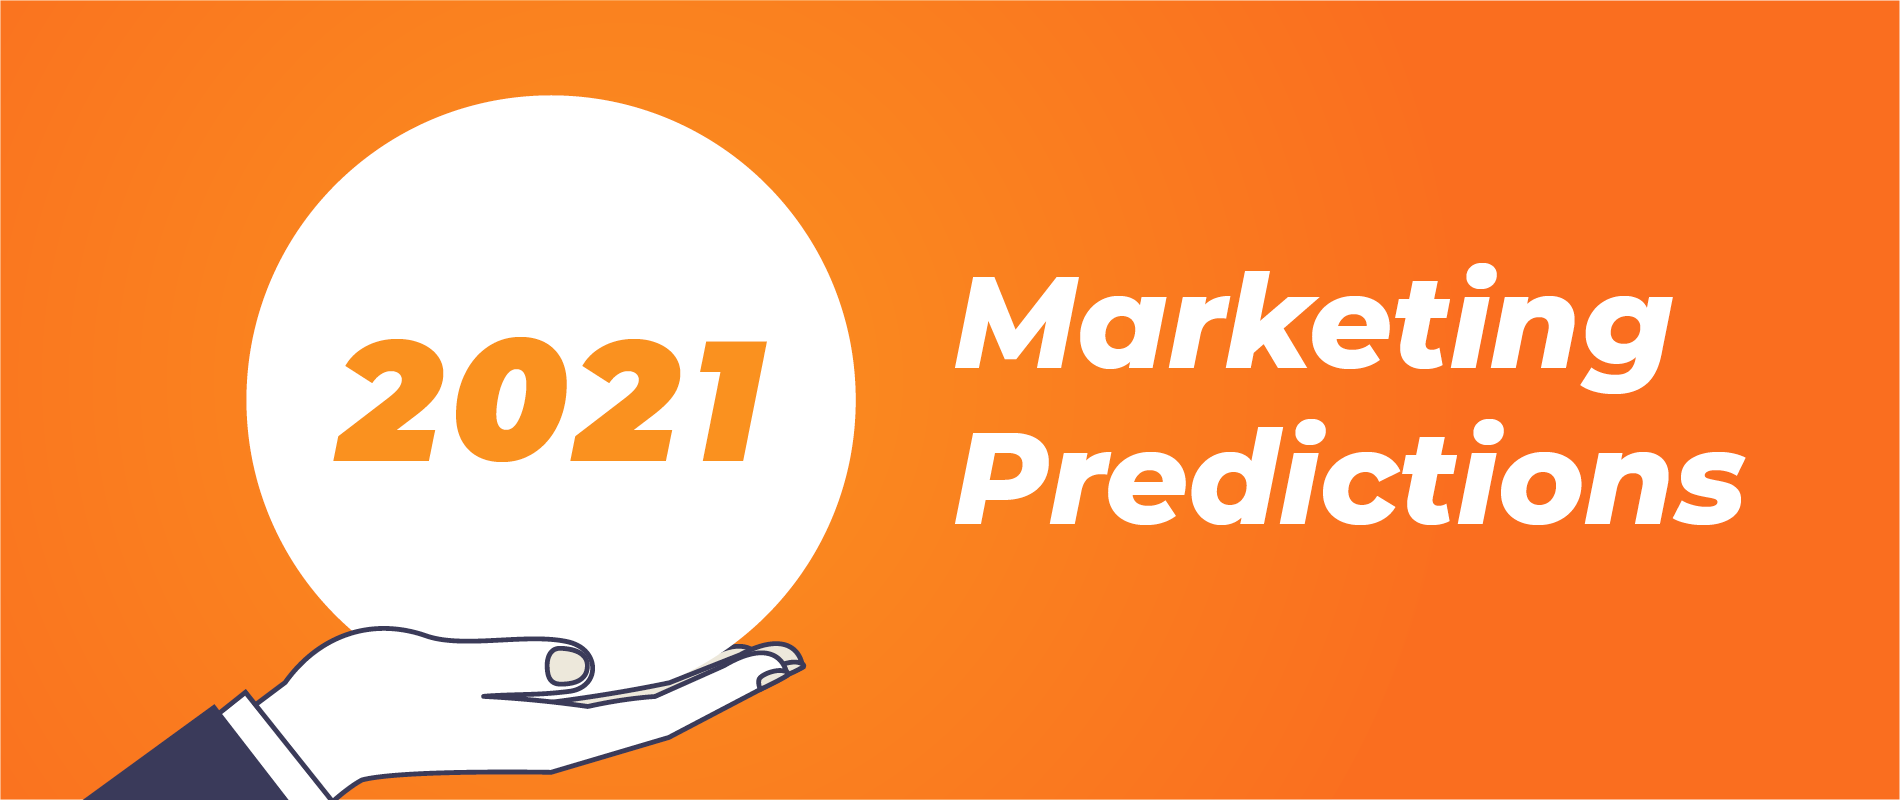 SaaS Marketing Predictions For 2021